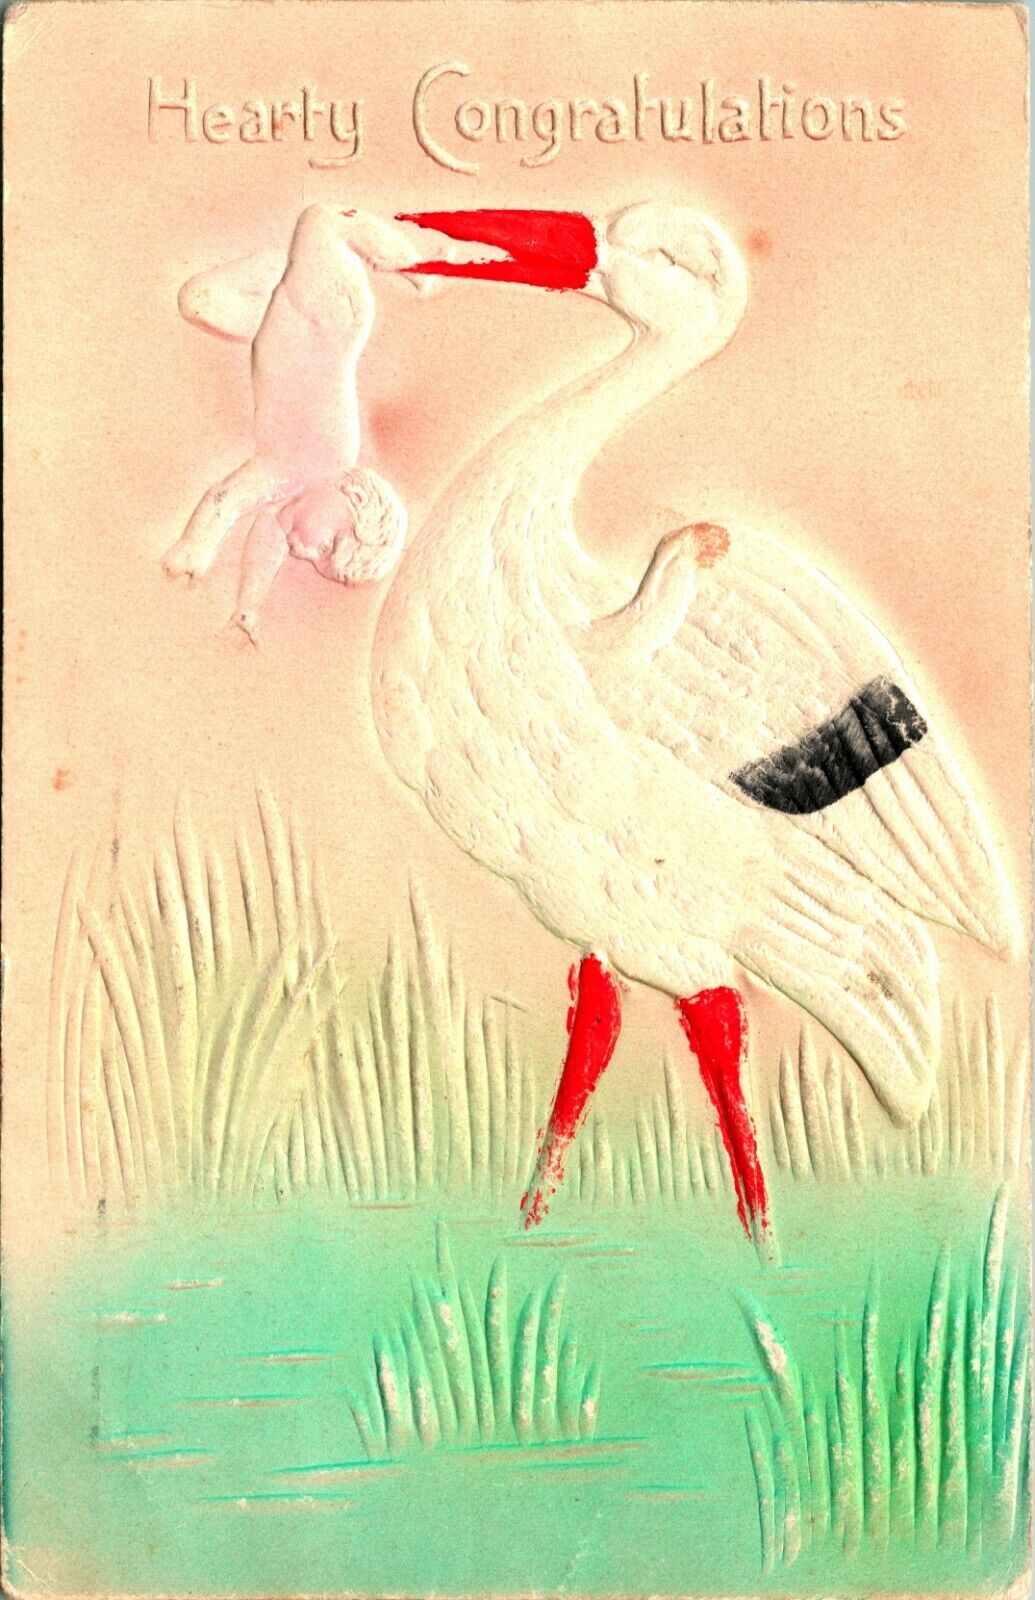 Hearty Congratulations Stork Delivering Baby Embossed Air Brushed Postcard 1910